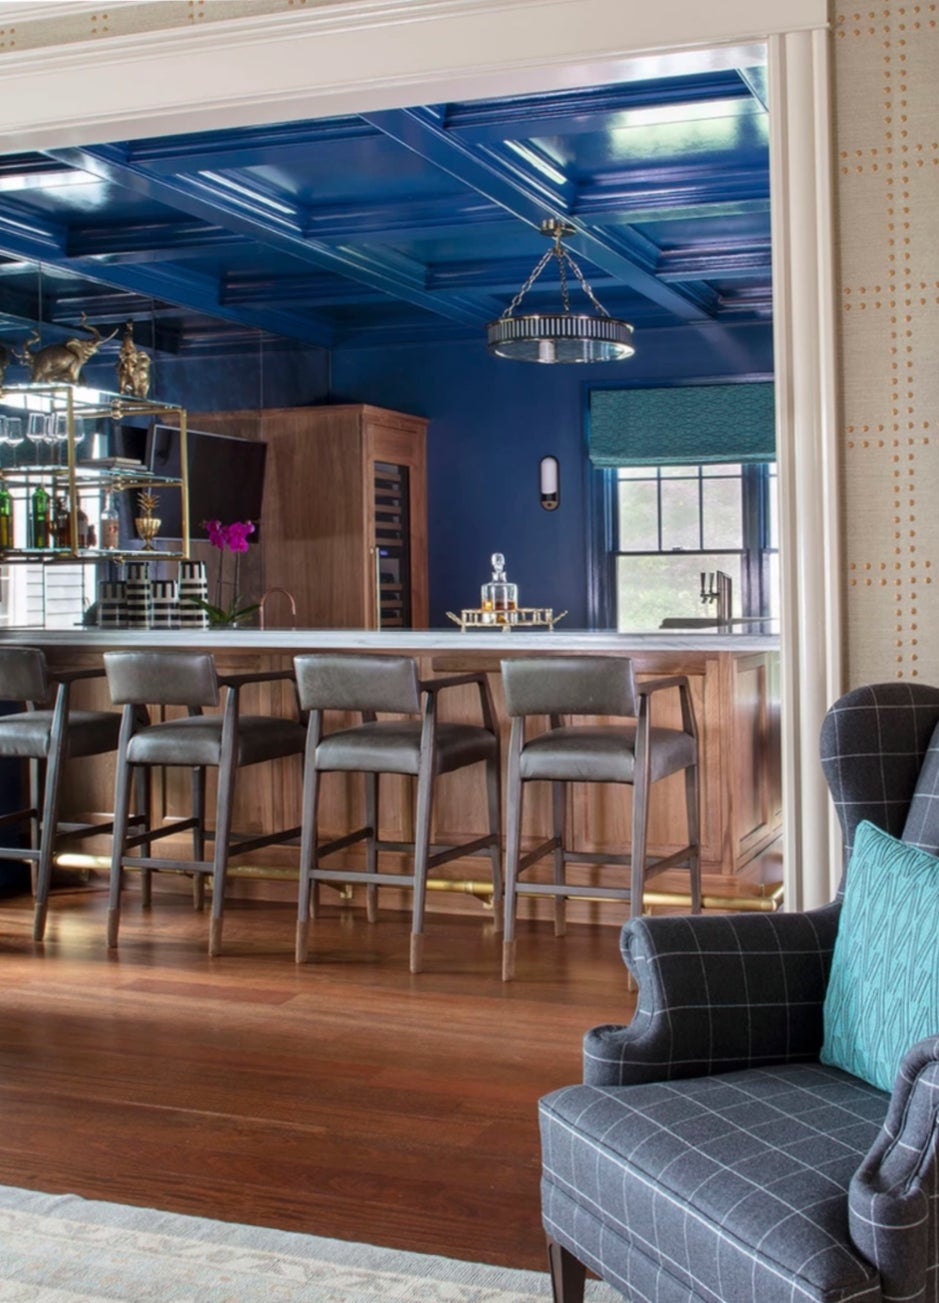 The coffered ceiling and the walls in this space are painted a moody dark blue. There is a wing chair in the foreground with a blue checkered print and a teal, patterned pillow. The bar is in the back. It has a white counter, four hard-backed metal stools, and a brass foot rail. There is a window behind the bar, and the sunlight is bouncing off the glass backsplash behind open shelving filled with liquor bottles. There is a carafe on top of the bar.